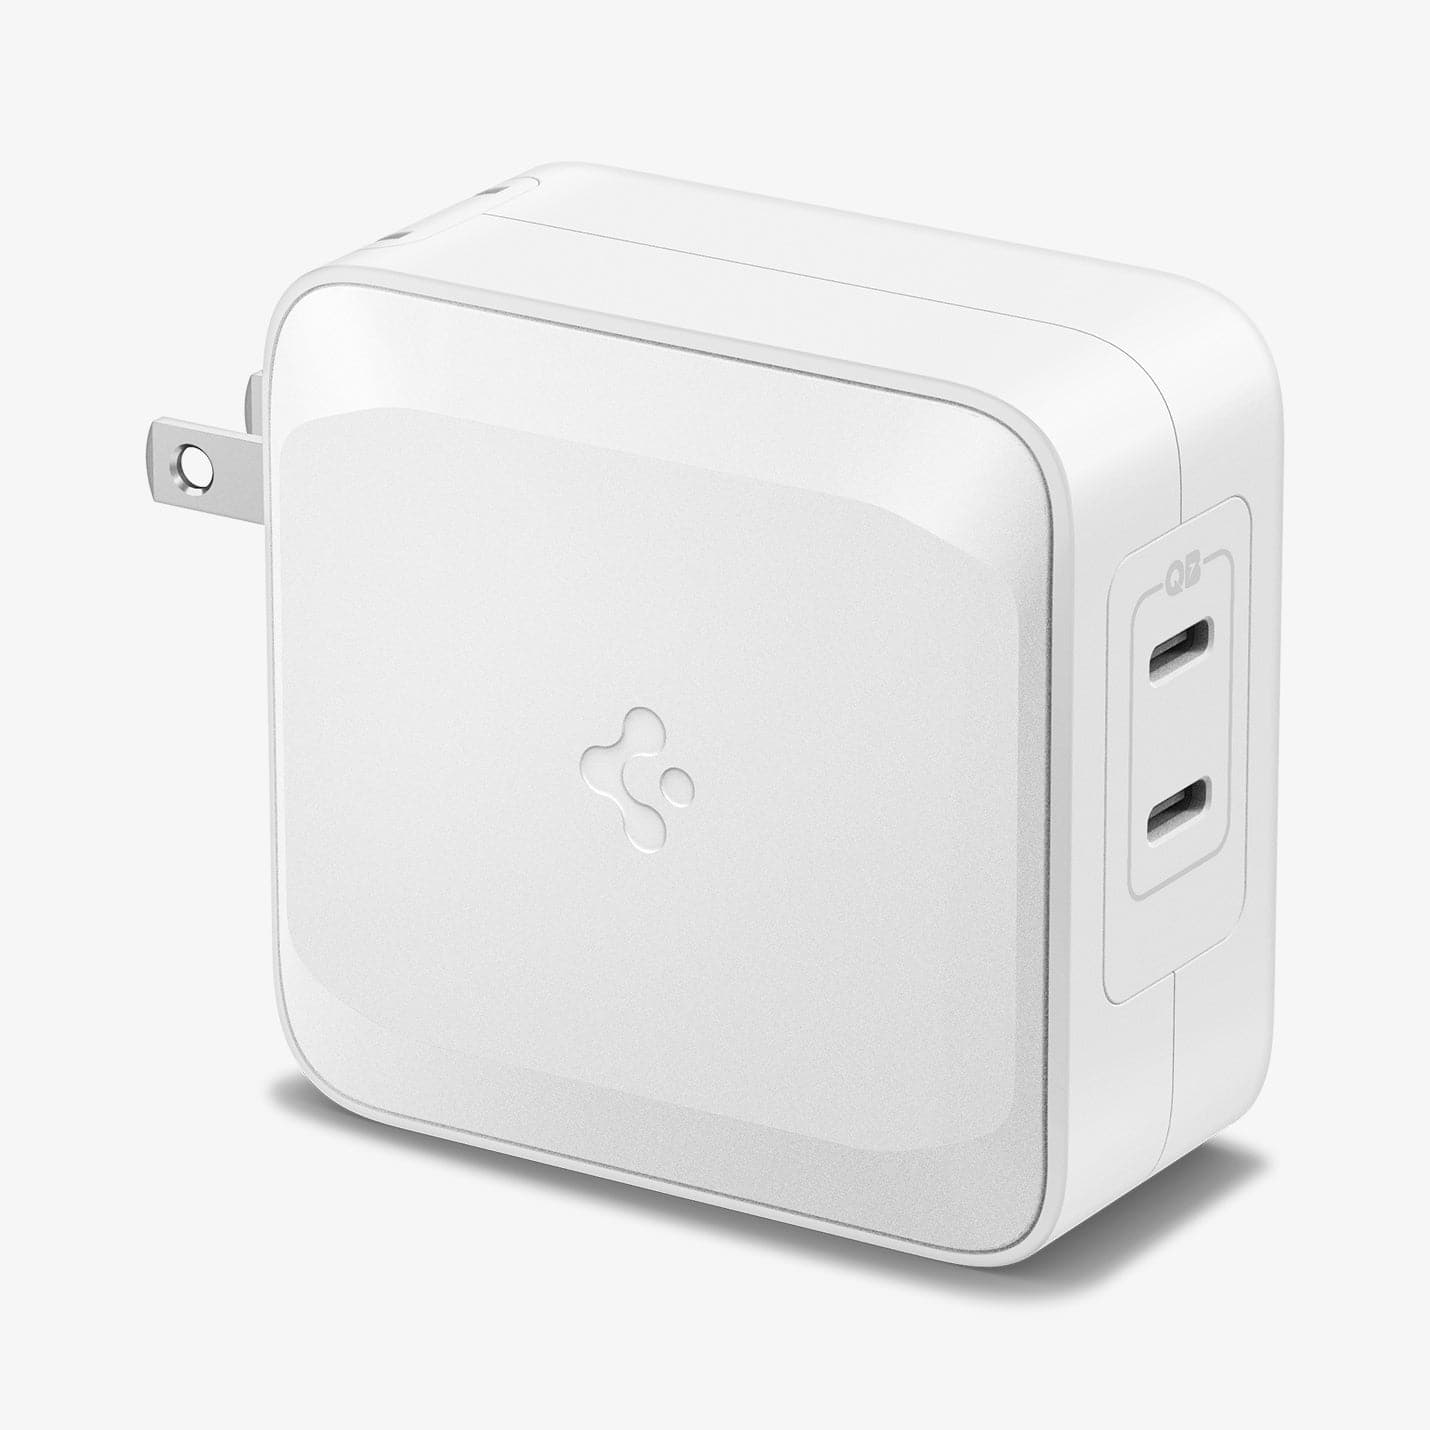 ACH02122 - ArcStation™ Pro 100W Wall Charger PE2006 in white showing the front, side and top